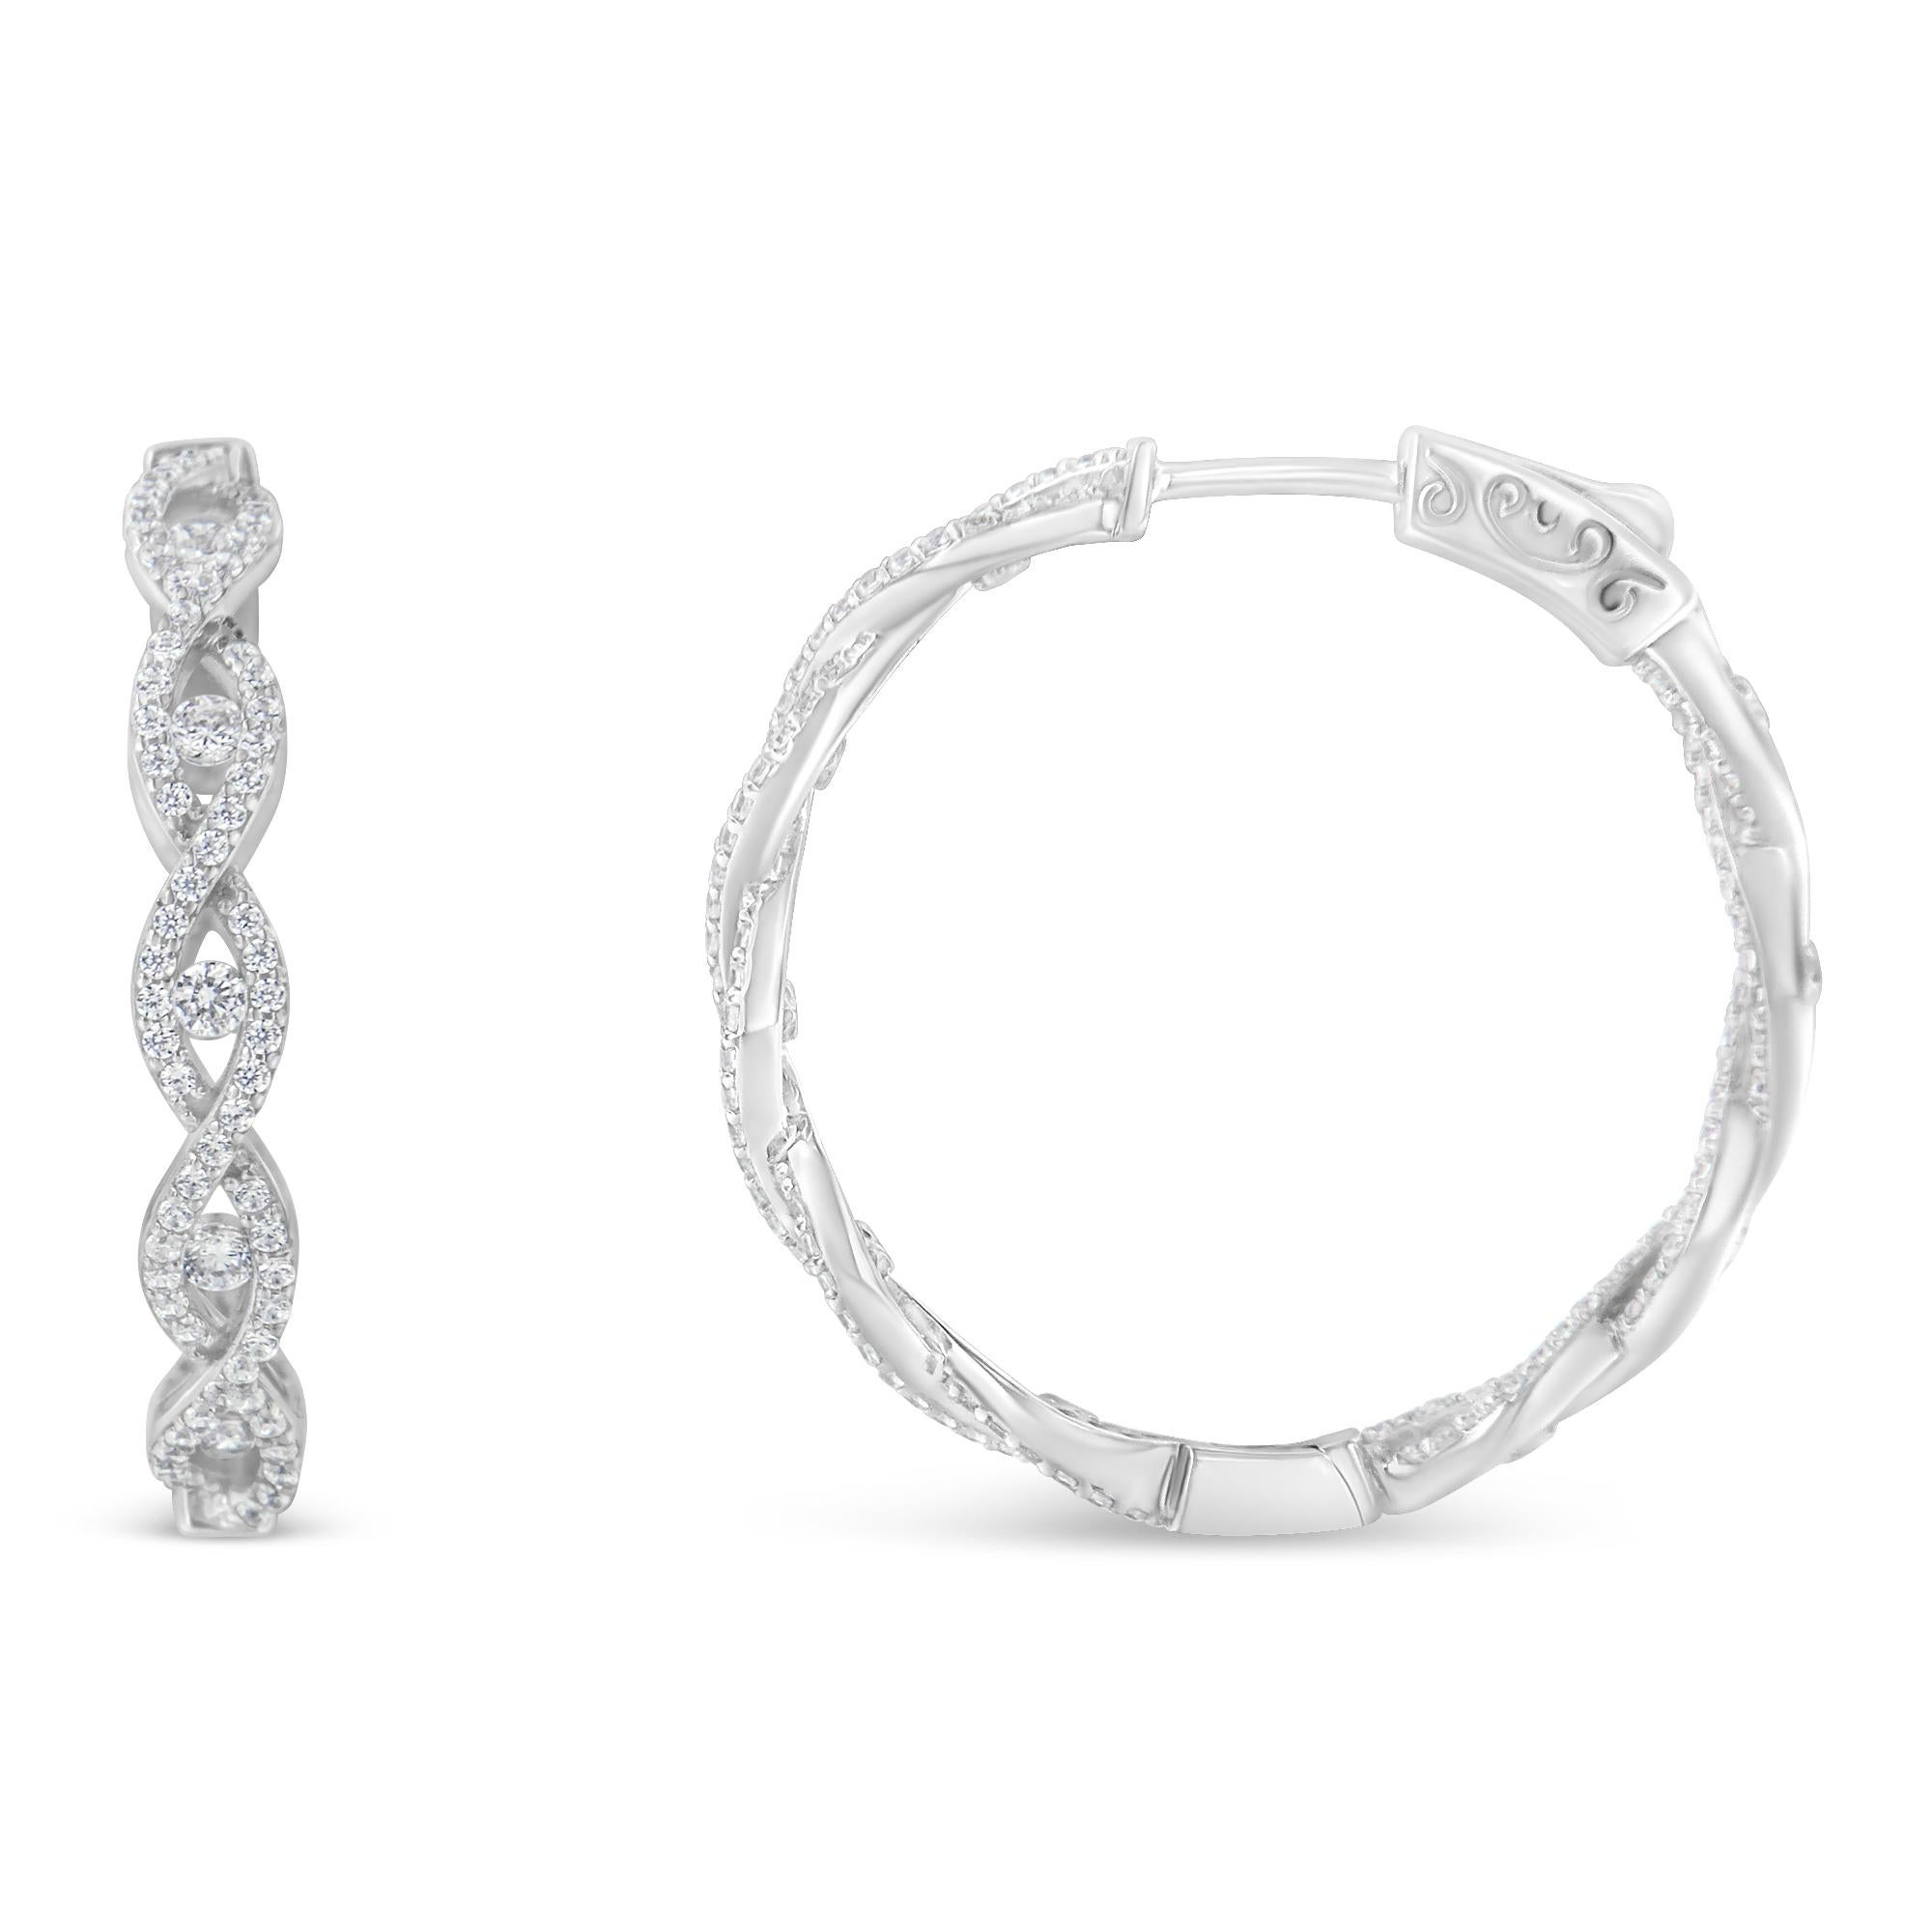 A pair of elegant diamond drop earrings features an elongated infinity design set with diamonds. Each infinity shape has a central round diamond for extra sparkle. Crafted in 10 karat white gold, they have a total diamond weight of 1 1/2 carats.